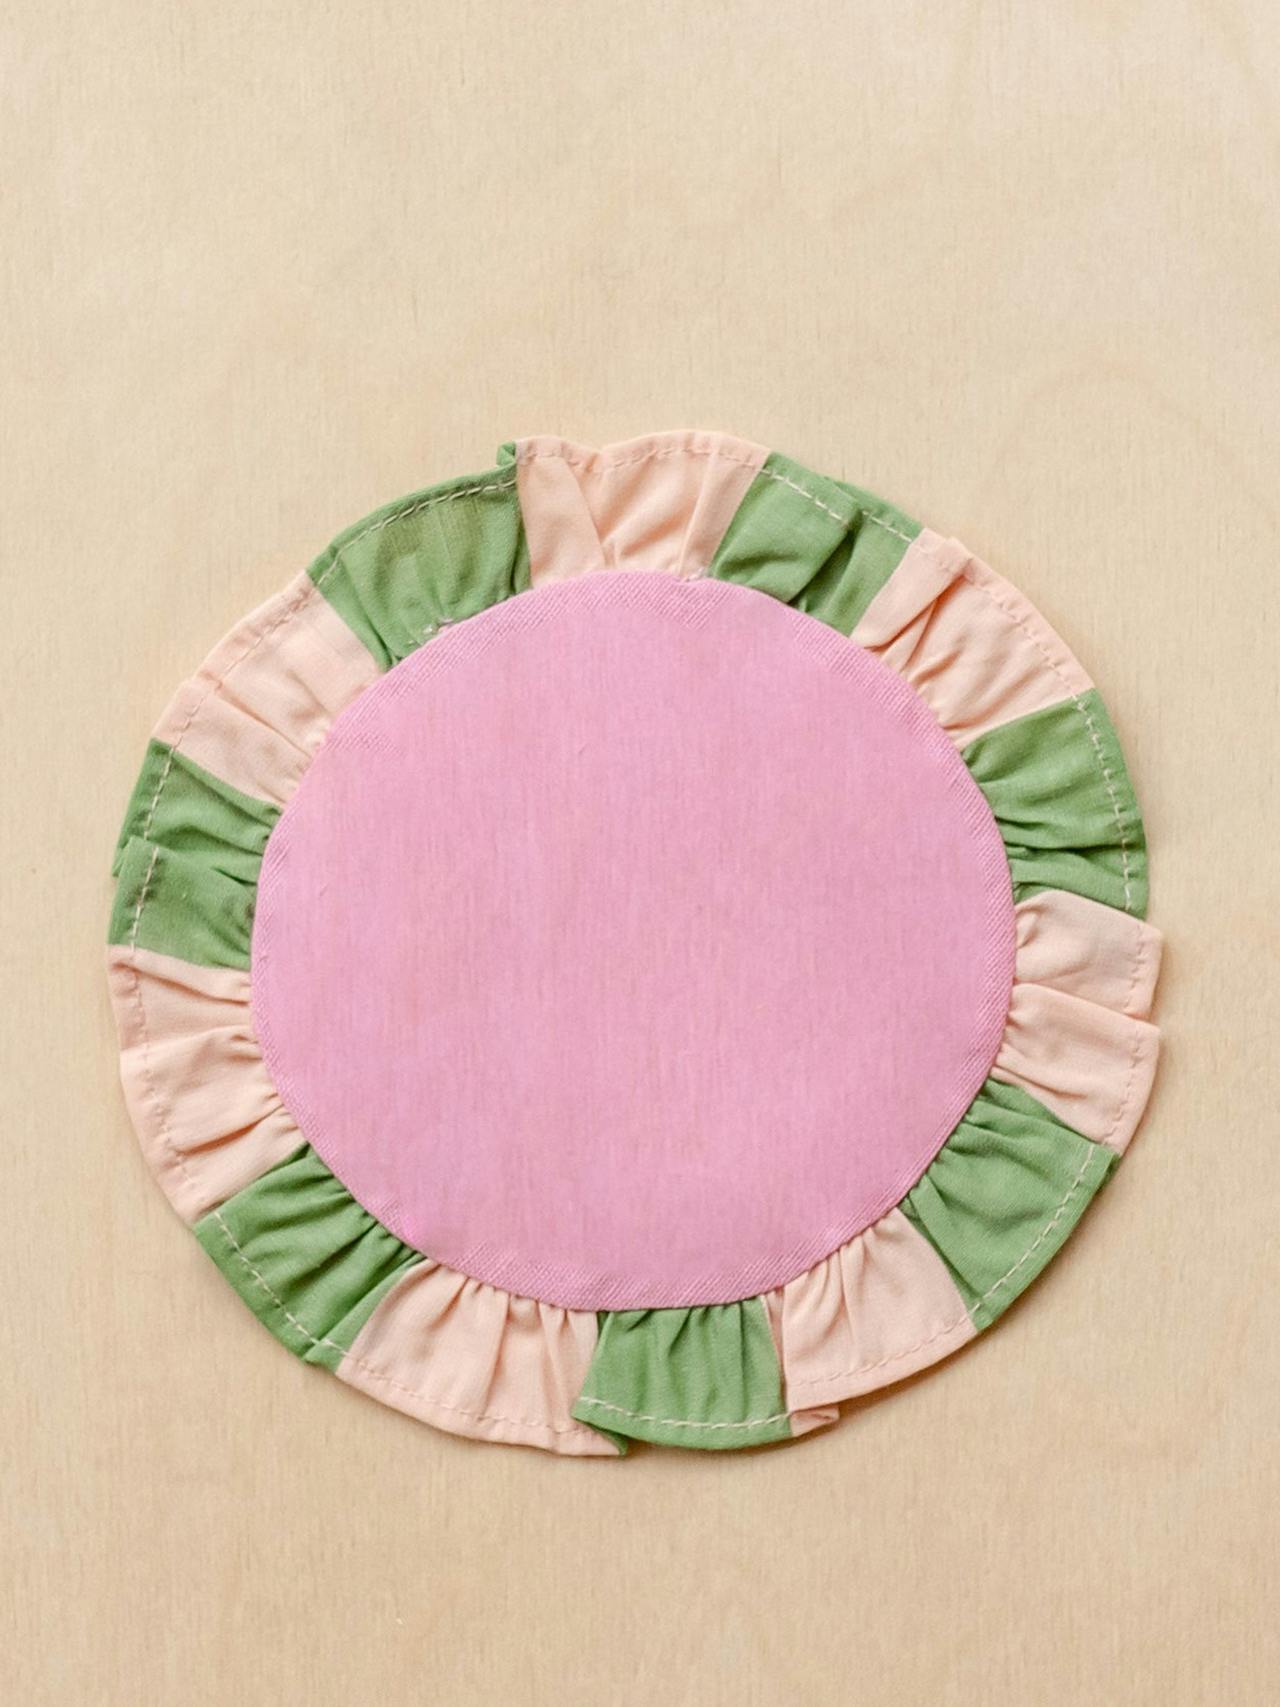 Cotton coasters in pink and green, set of 2